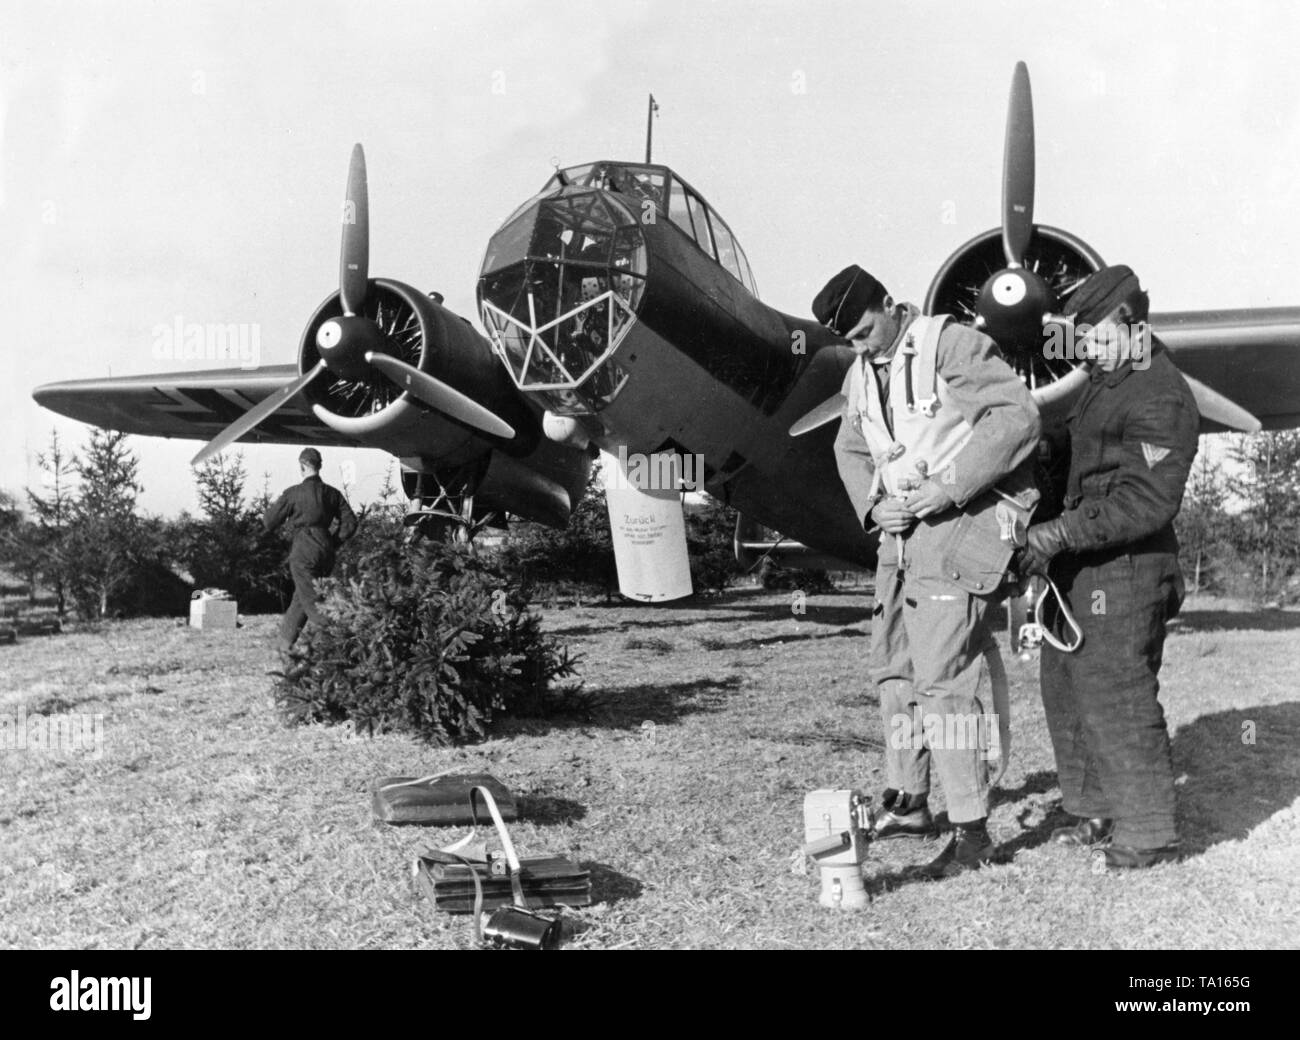 Dornier Do 17 Combat aircraft preparing for takeoff. A man of the ground staff helps a member of the crew with the flight suit. Stock Photo